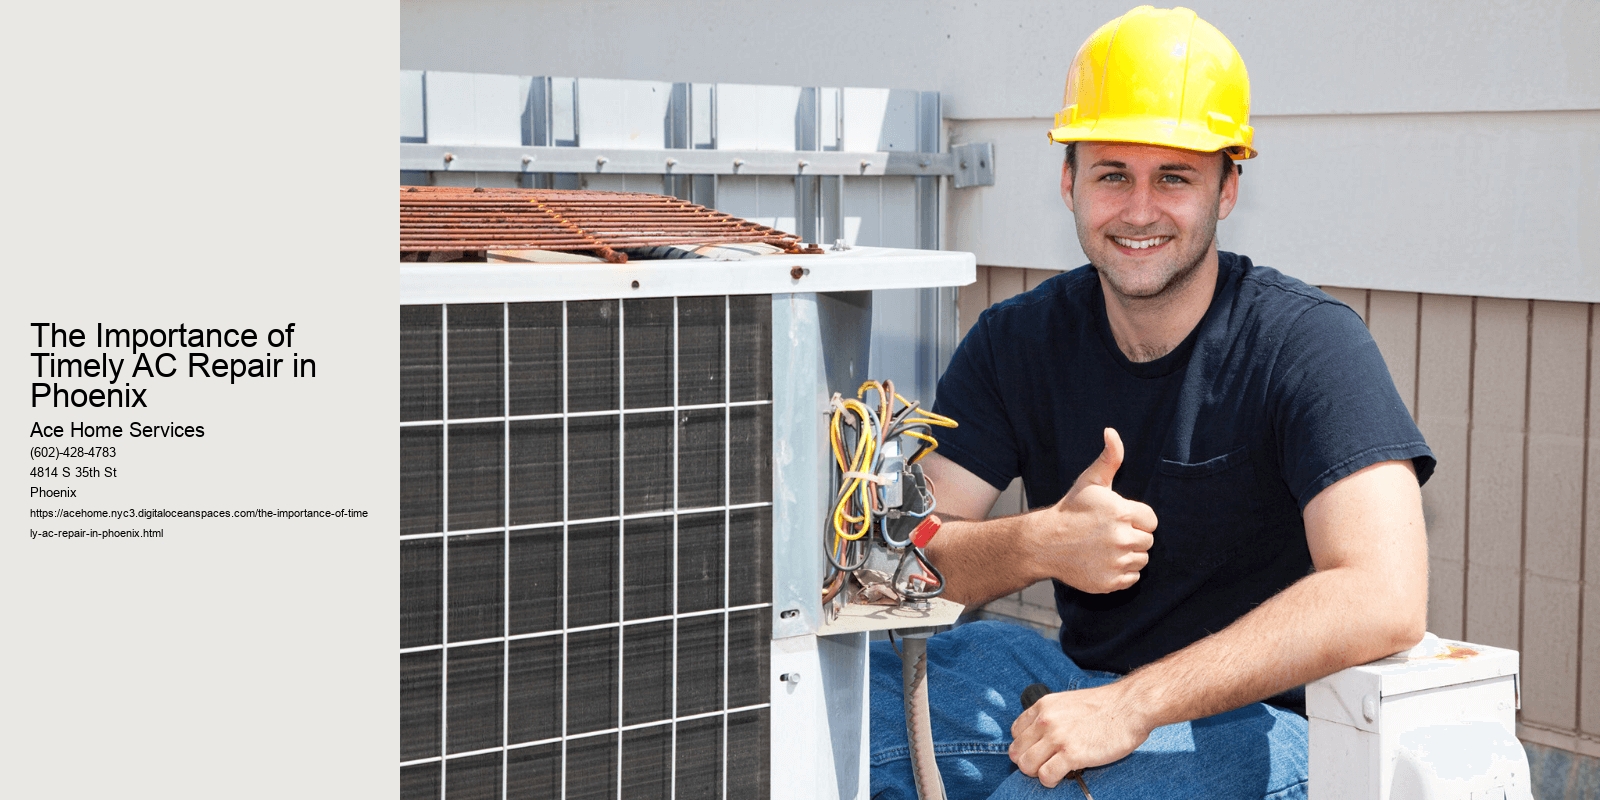 The Importance of Timely AC Repair in Phoenix